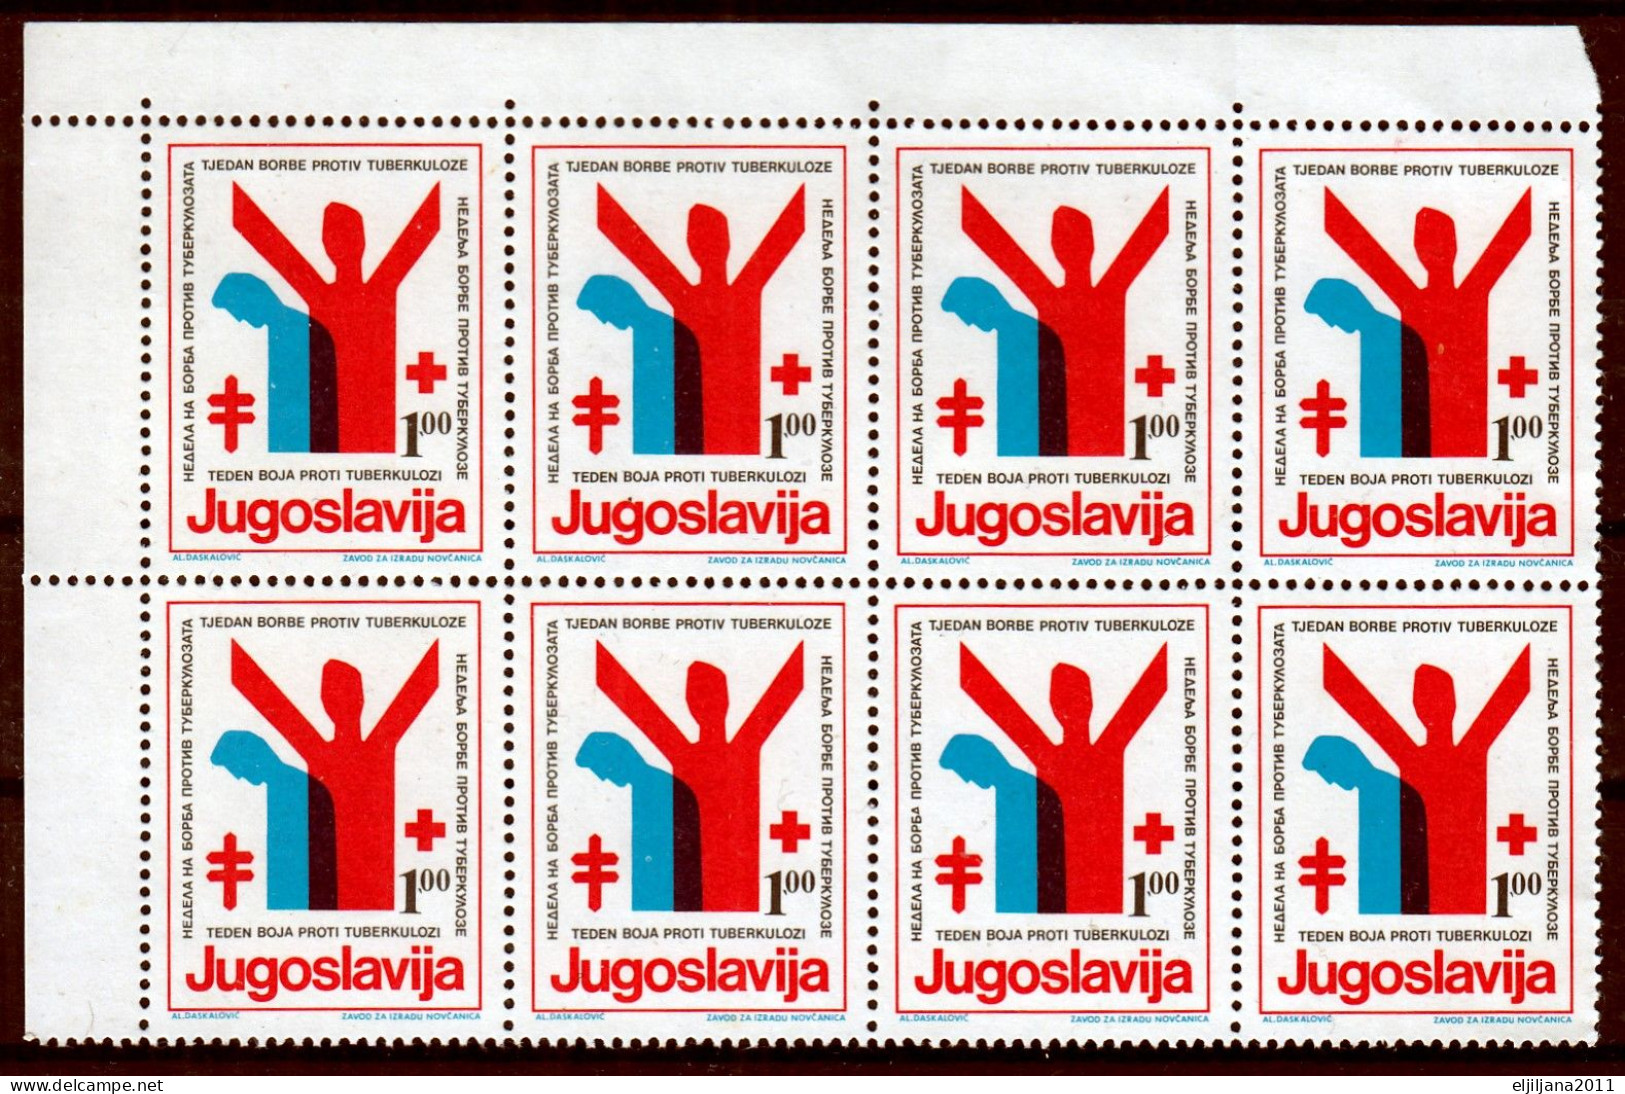 SALE !! 50 % OFF !! ⁕ Yugoslavia 1976 ⁕ Charity Stamp / Red Cross Week / Anti-tuberculosis - Surcharge ⁕ 8v MNH / Sheet - Beneficenza